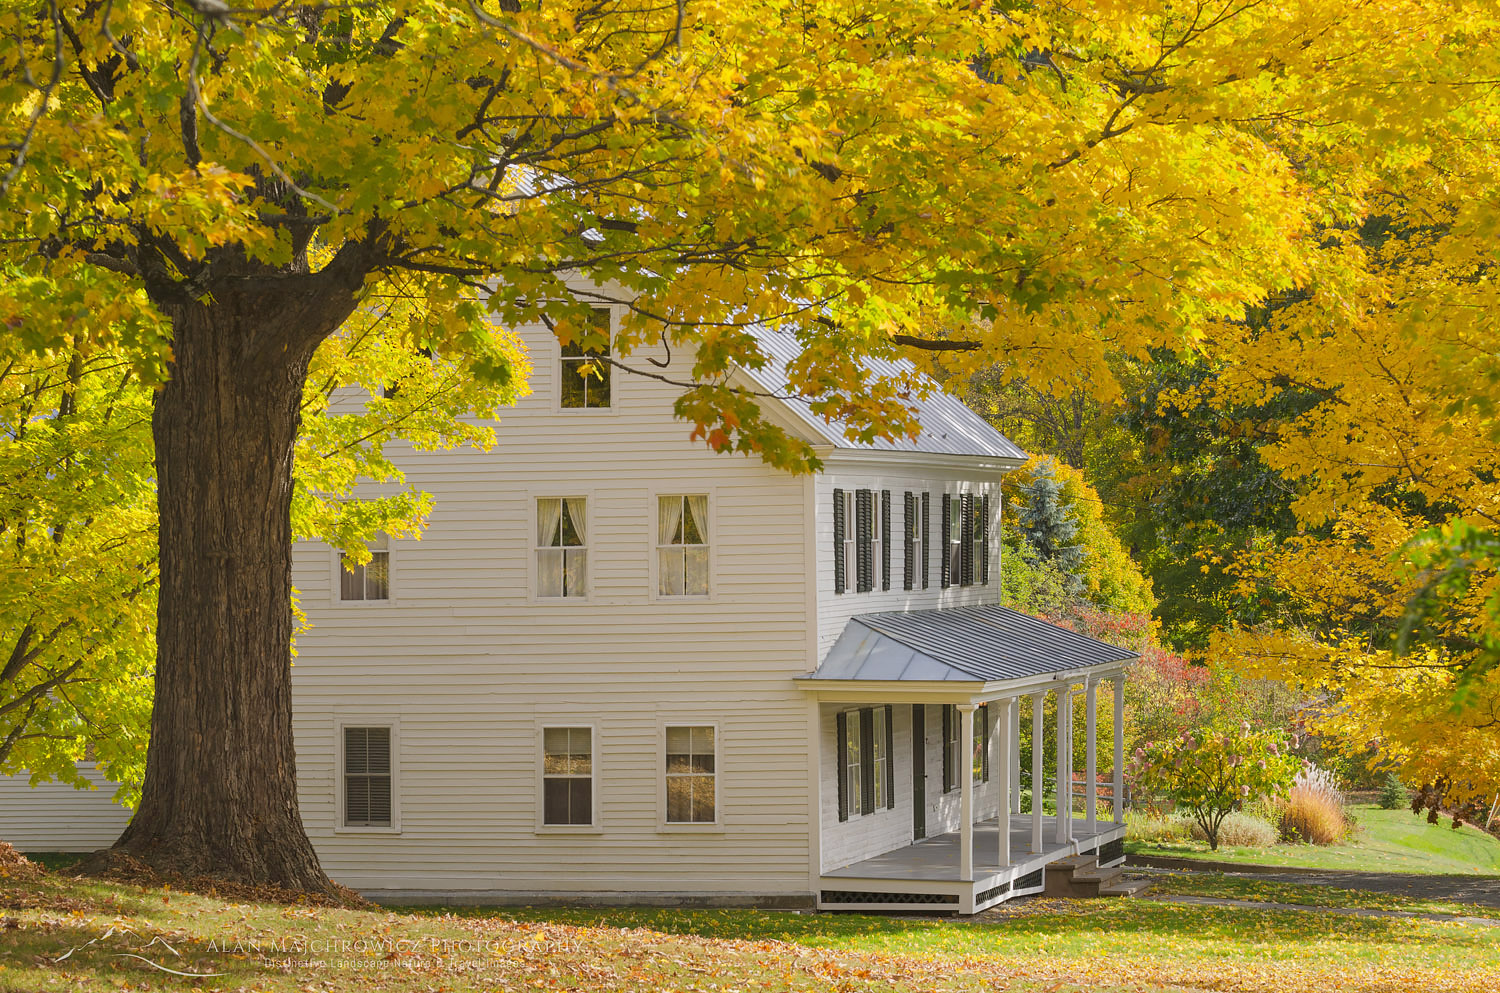 House framed by golden fall foliage, Sharon, Vermont #59391